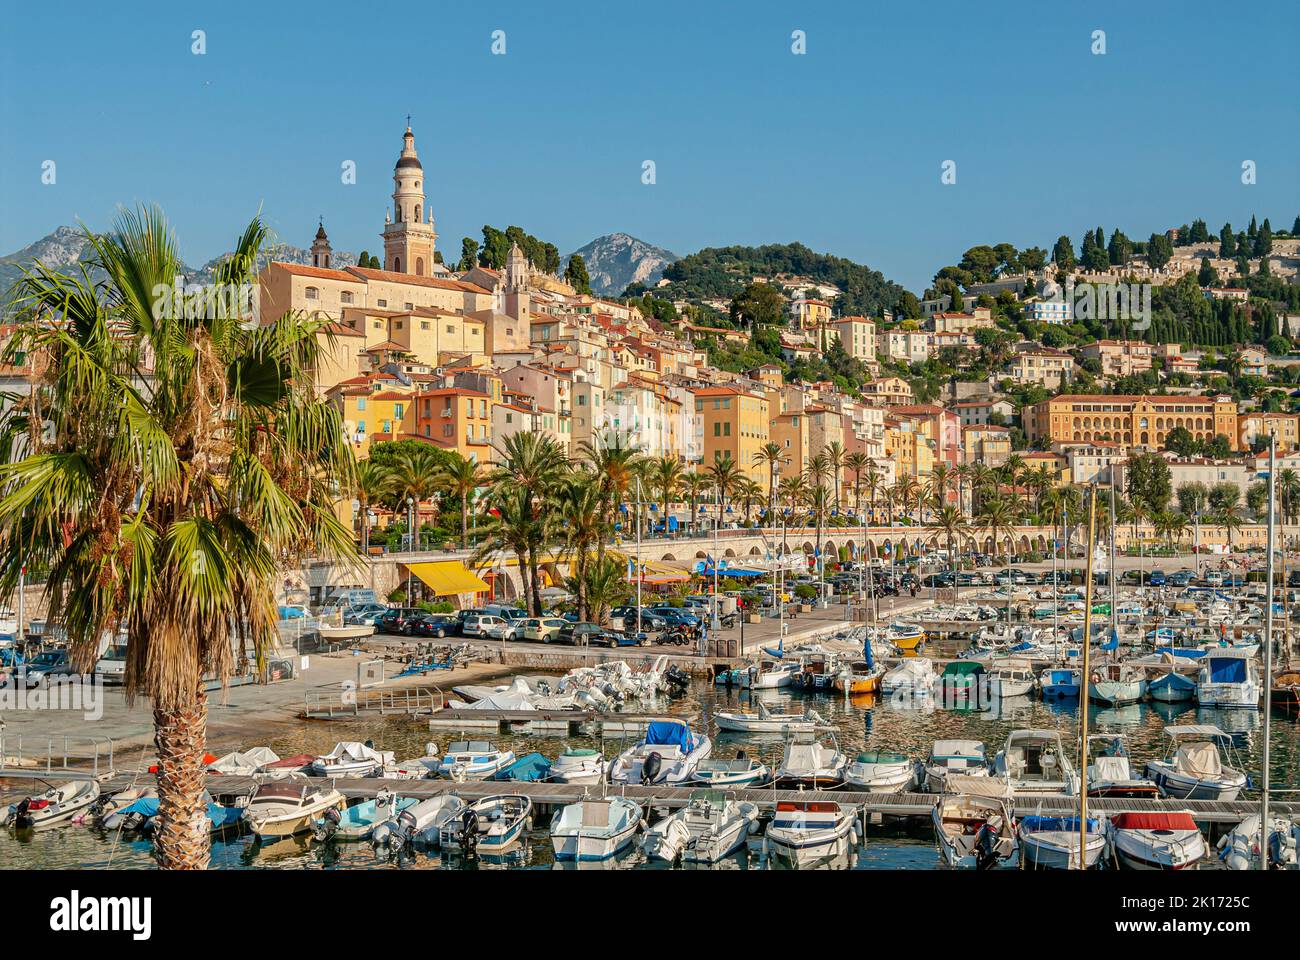 Marina and Old town of Menton at the French Rivera, Côte d'Azur, France Stock Photo